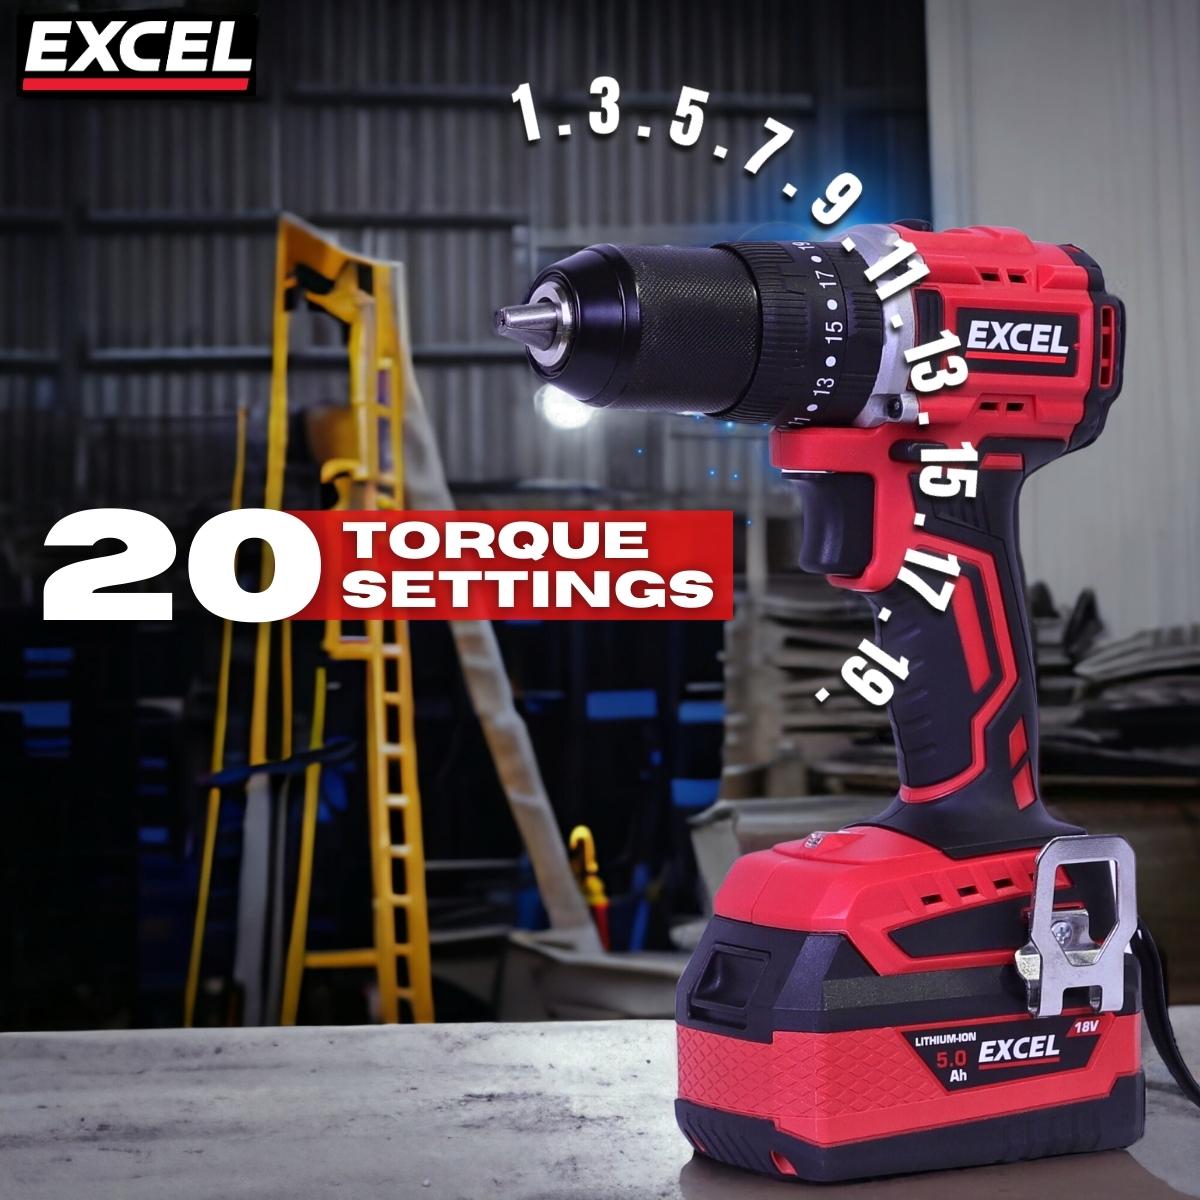 Excel 18V Brushless Combi Drill Body Only (Battery & Charger Not Included)